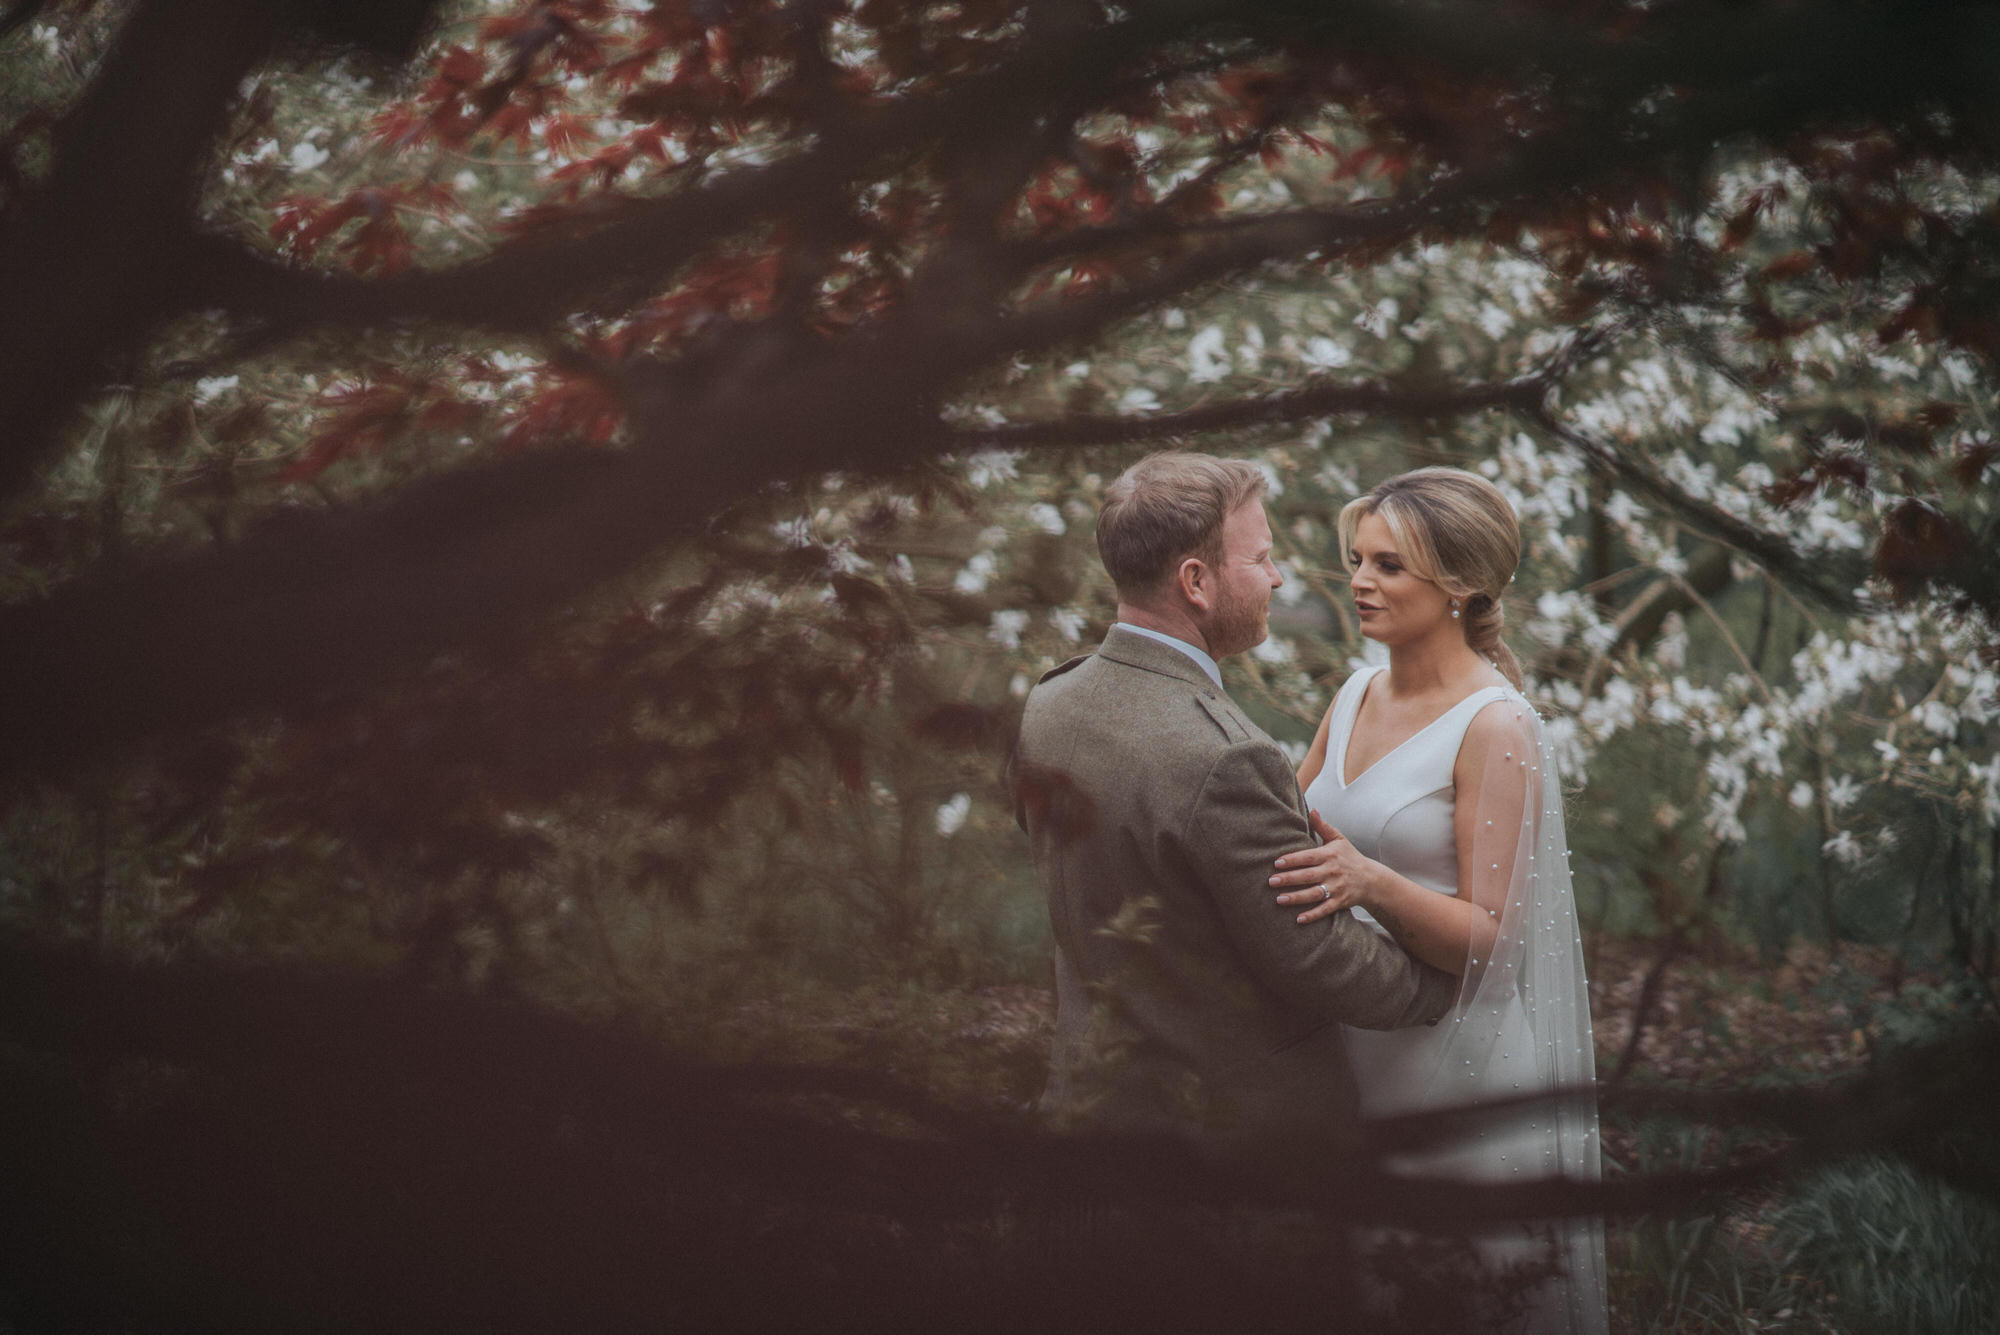 The bride and groom are seen in amongst some trees